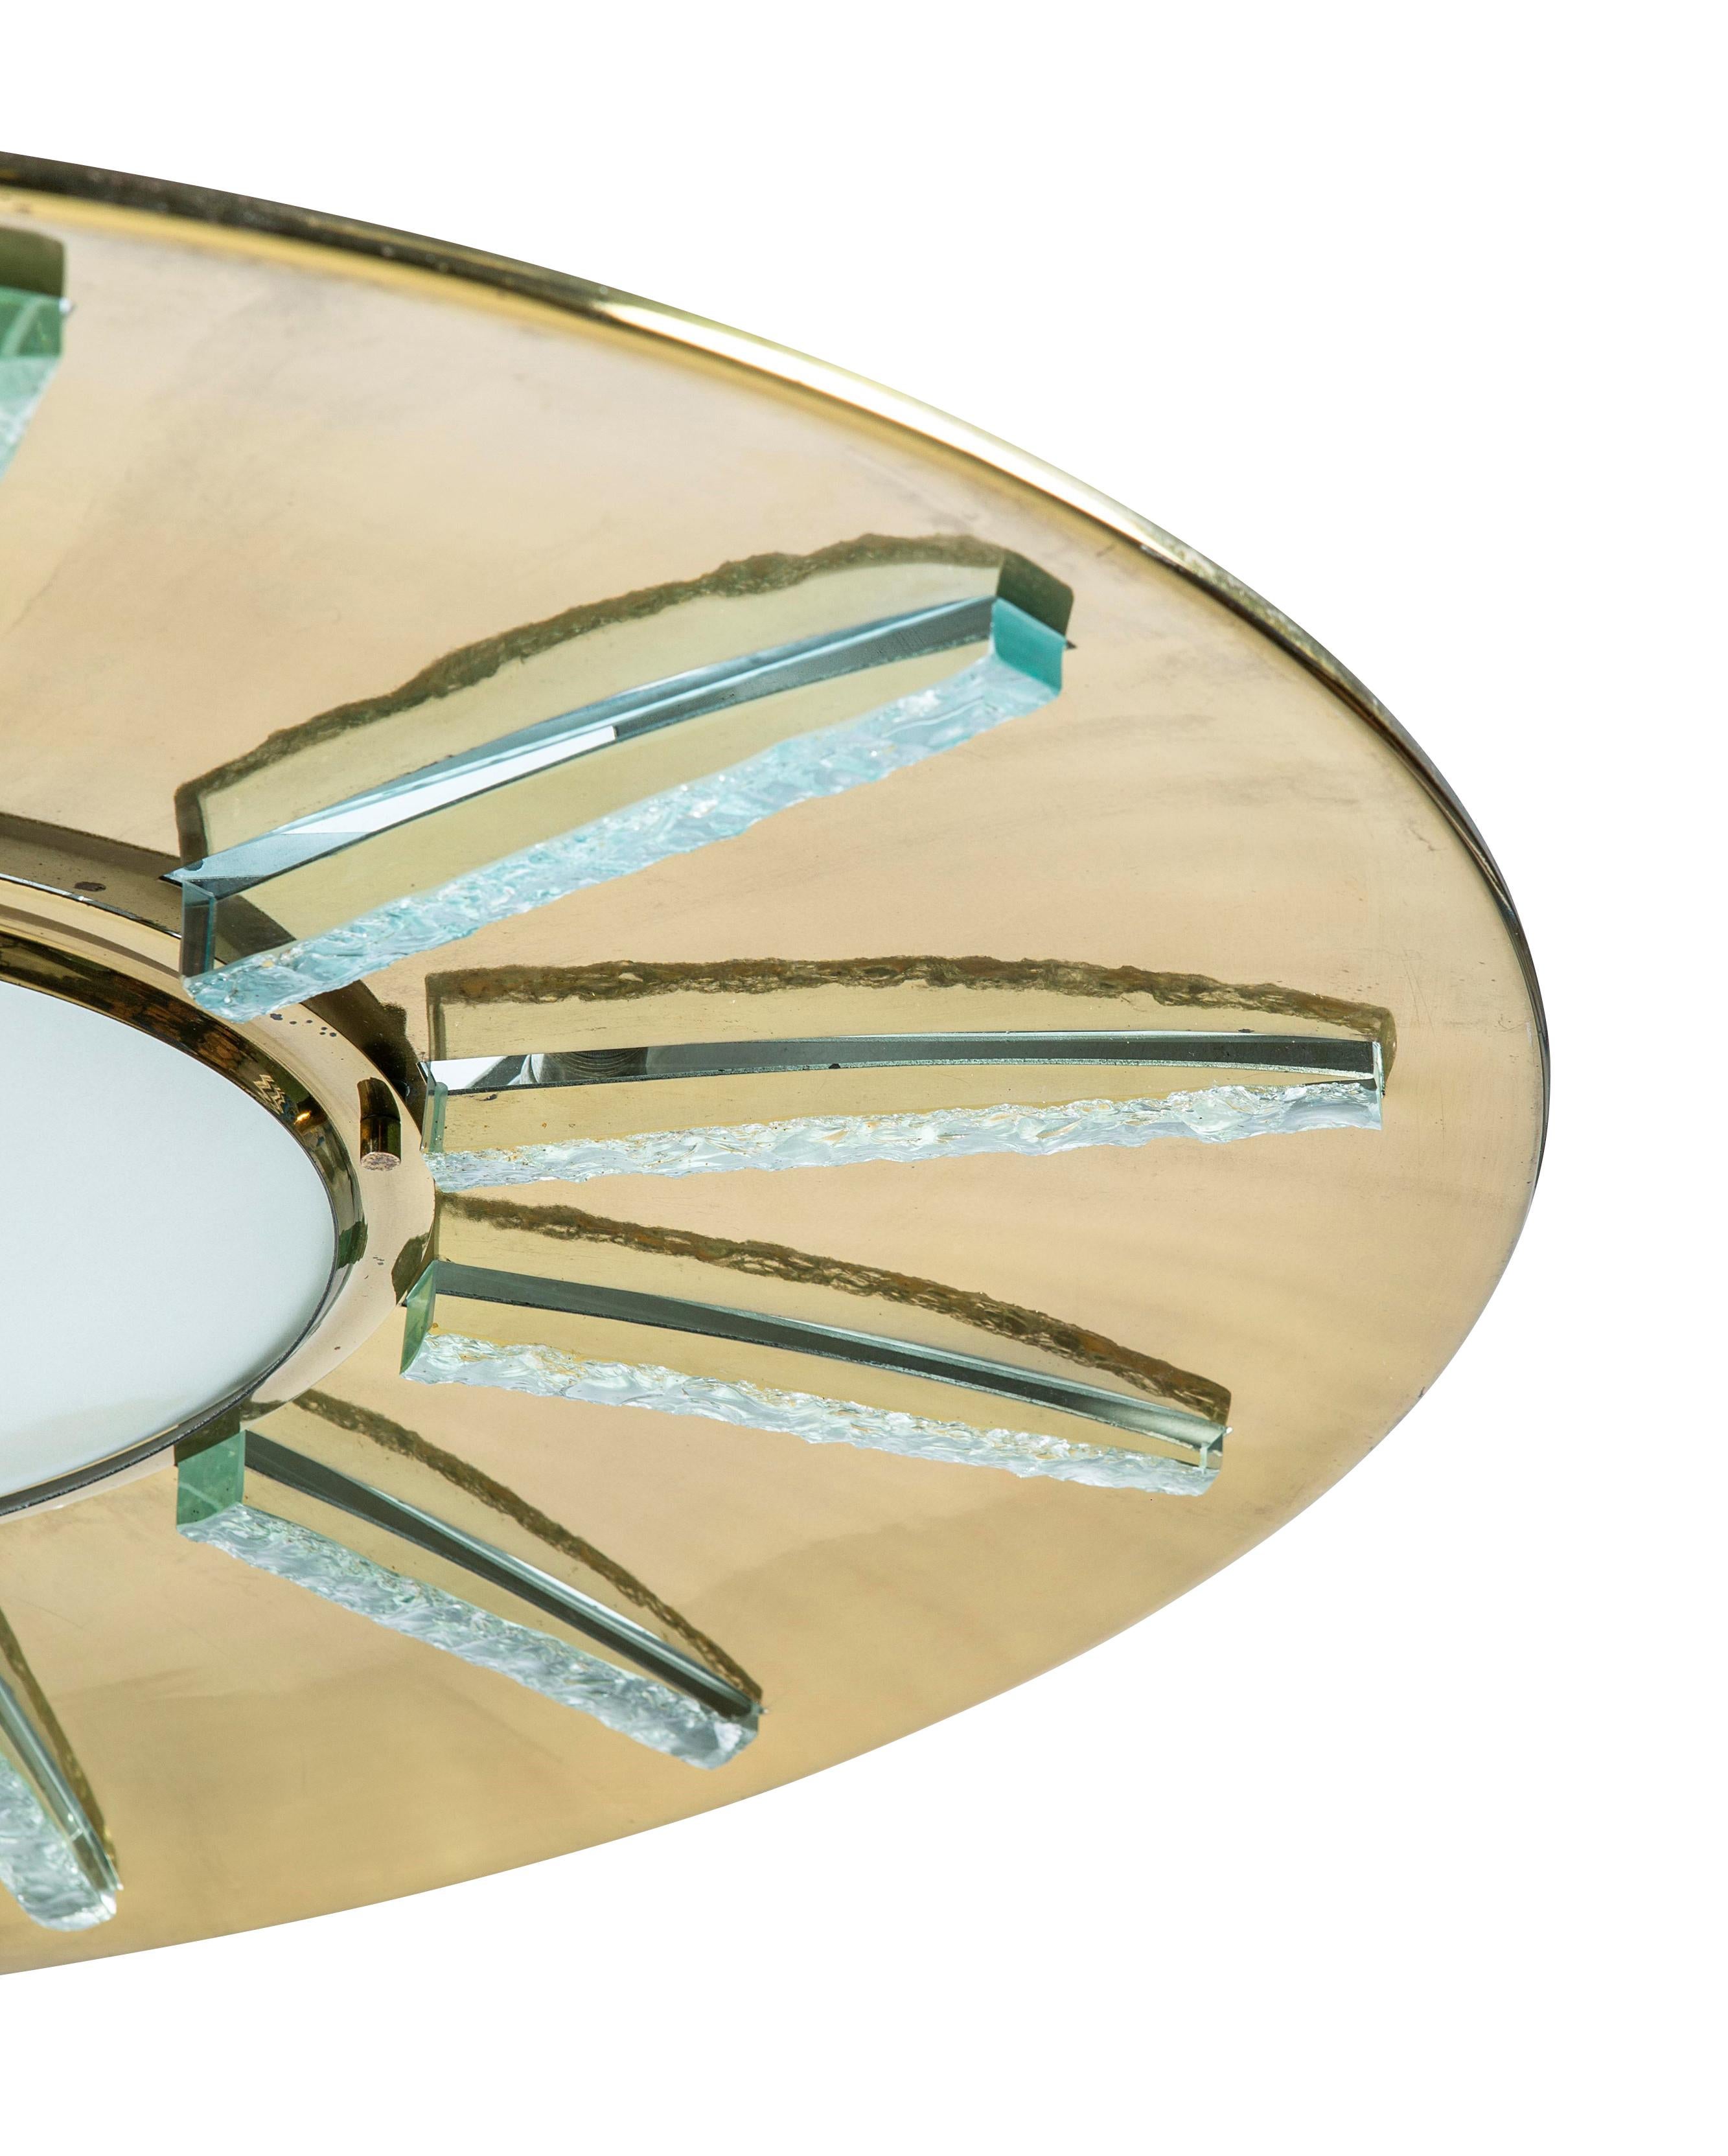 Rare Fontana Arte ceiling light model 2271 designed by Max Ingrand in the 1960s. Features a polished brass frame with a radial glass design. The central white frosted glass is convex while the other glass elements are greenish in appearance due to